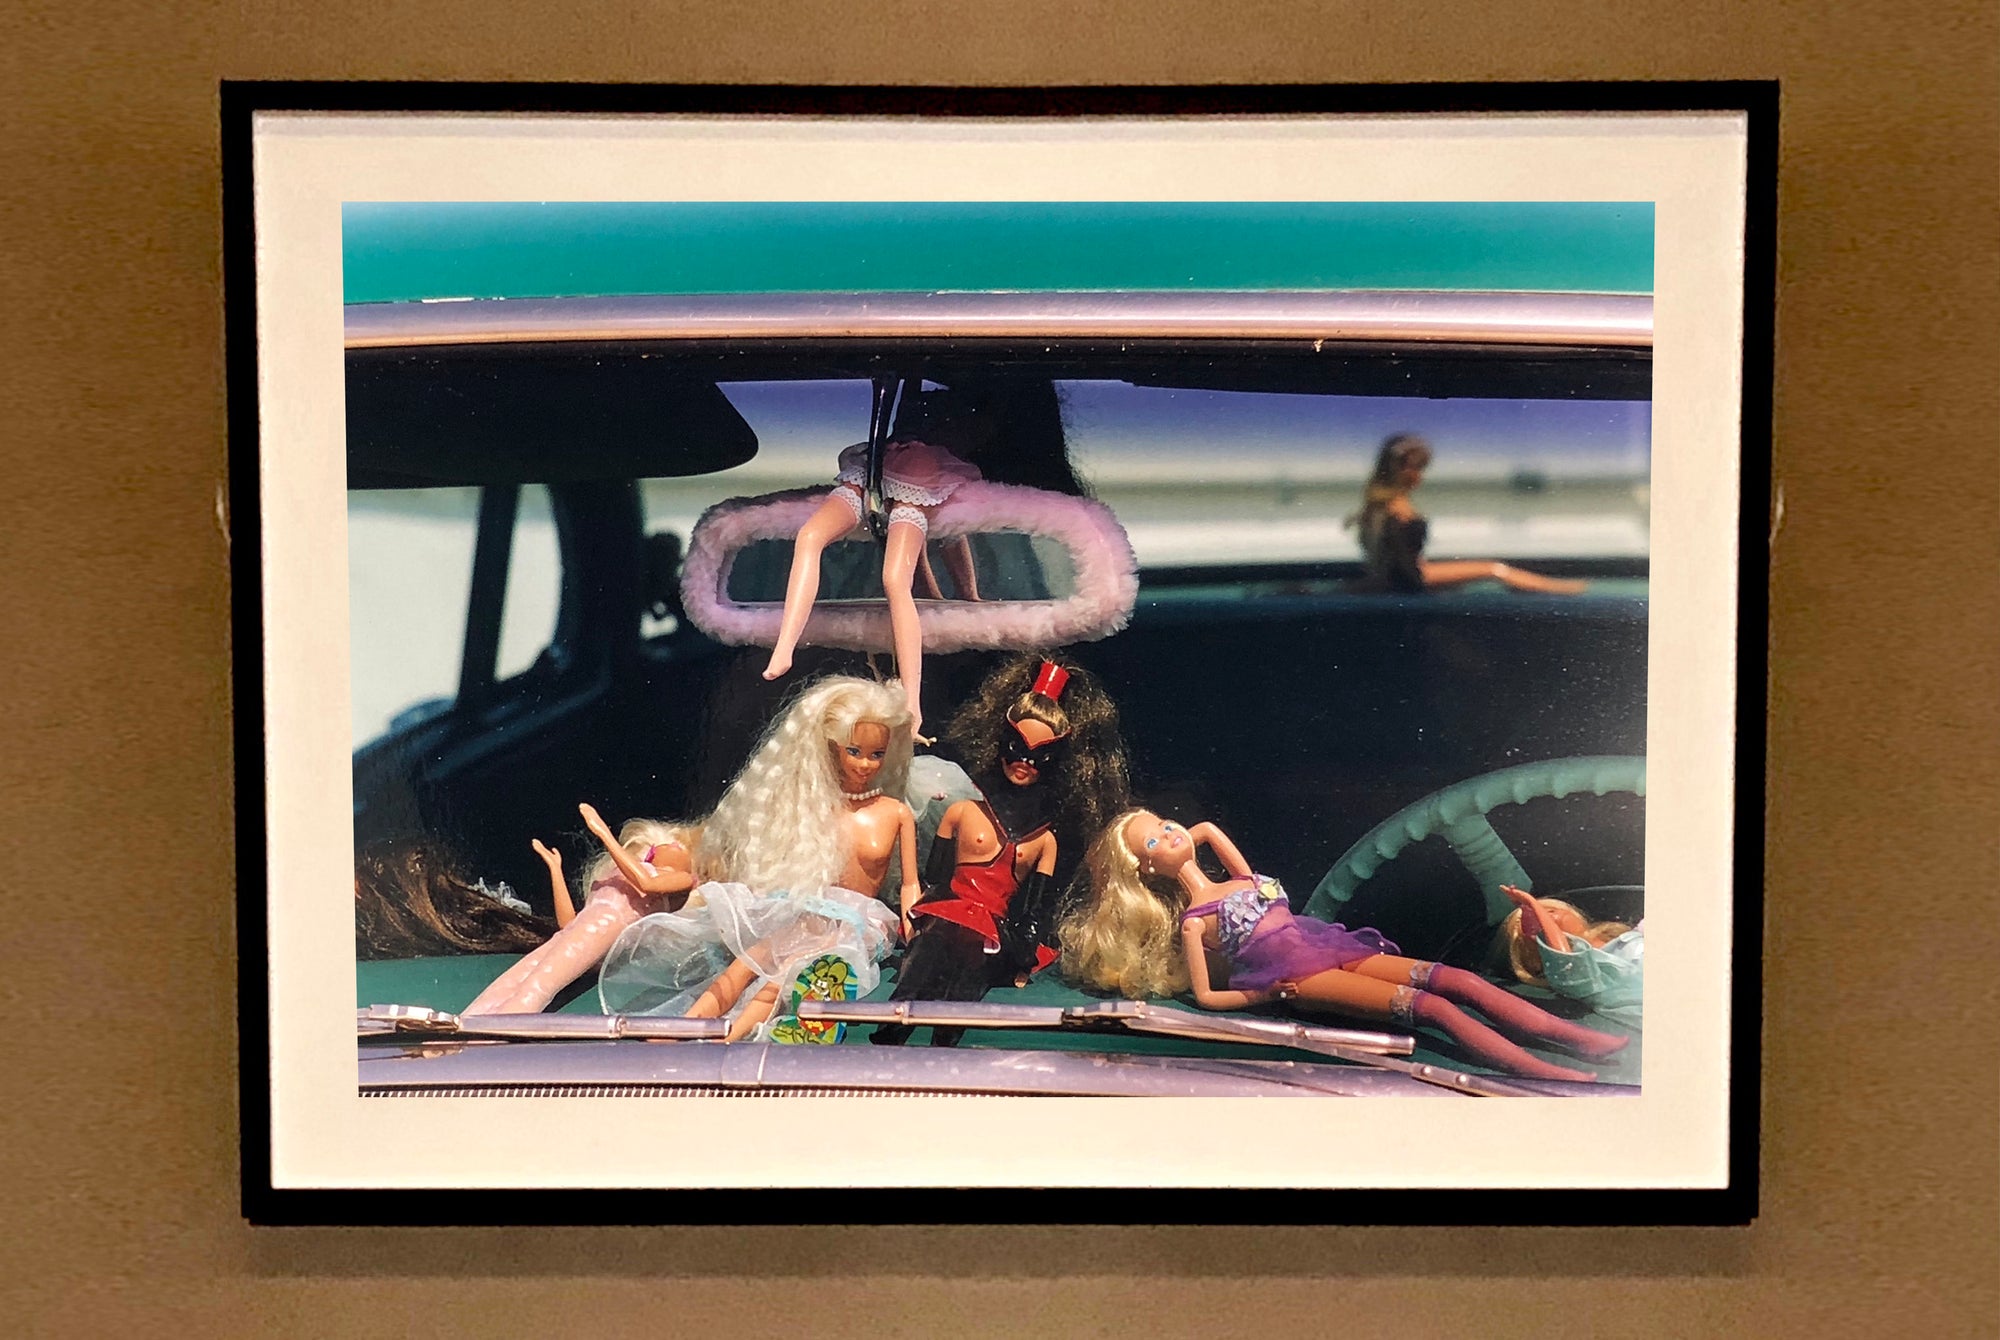 'Oldsmobile & Sinful Barbie's' photographed in, Las Vegas, Nevada, is part of Richard Heeps 'Man's Ruin' Series. This artwork makes up the three piece sequence: 'Wendy Flamin' Eyeball', 'Wendy Resting' & 'Oldsmobile and Sinful Barbie's' shot at the Rockabilly Weekender, Viva Las Vegas. Here this is a brilliantly adult version of the iconic Barbie Doll on the dashboard of a classic American Car. 